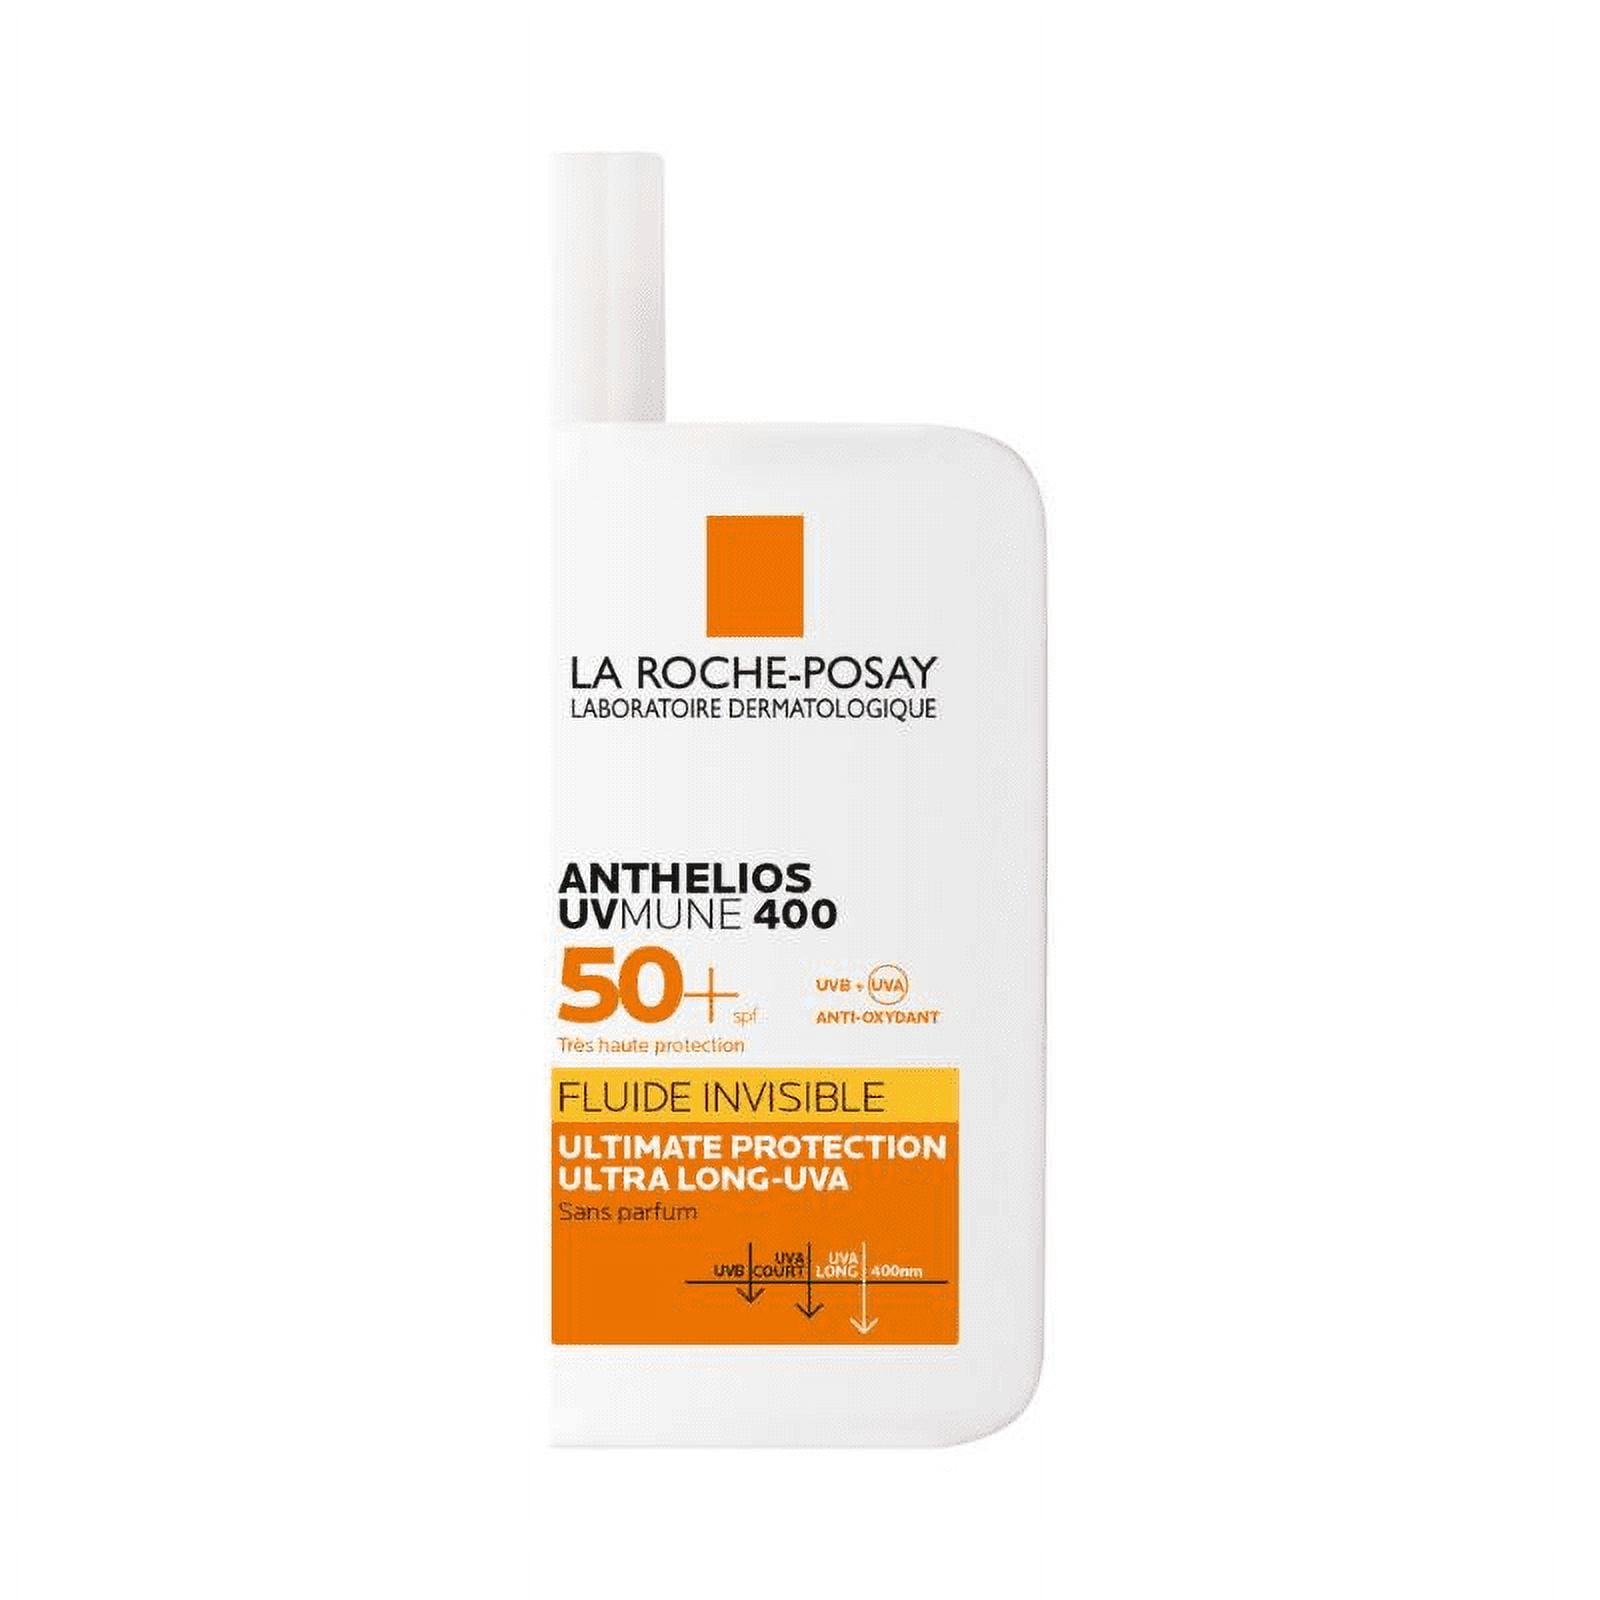 La Roche Posay Anthelios Uvmune Fluid SPF+50 High Protection Face Sunscreen For All Skins - Walmart.com